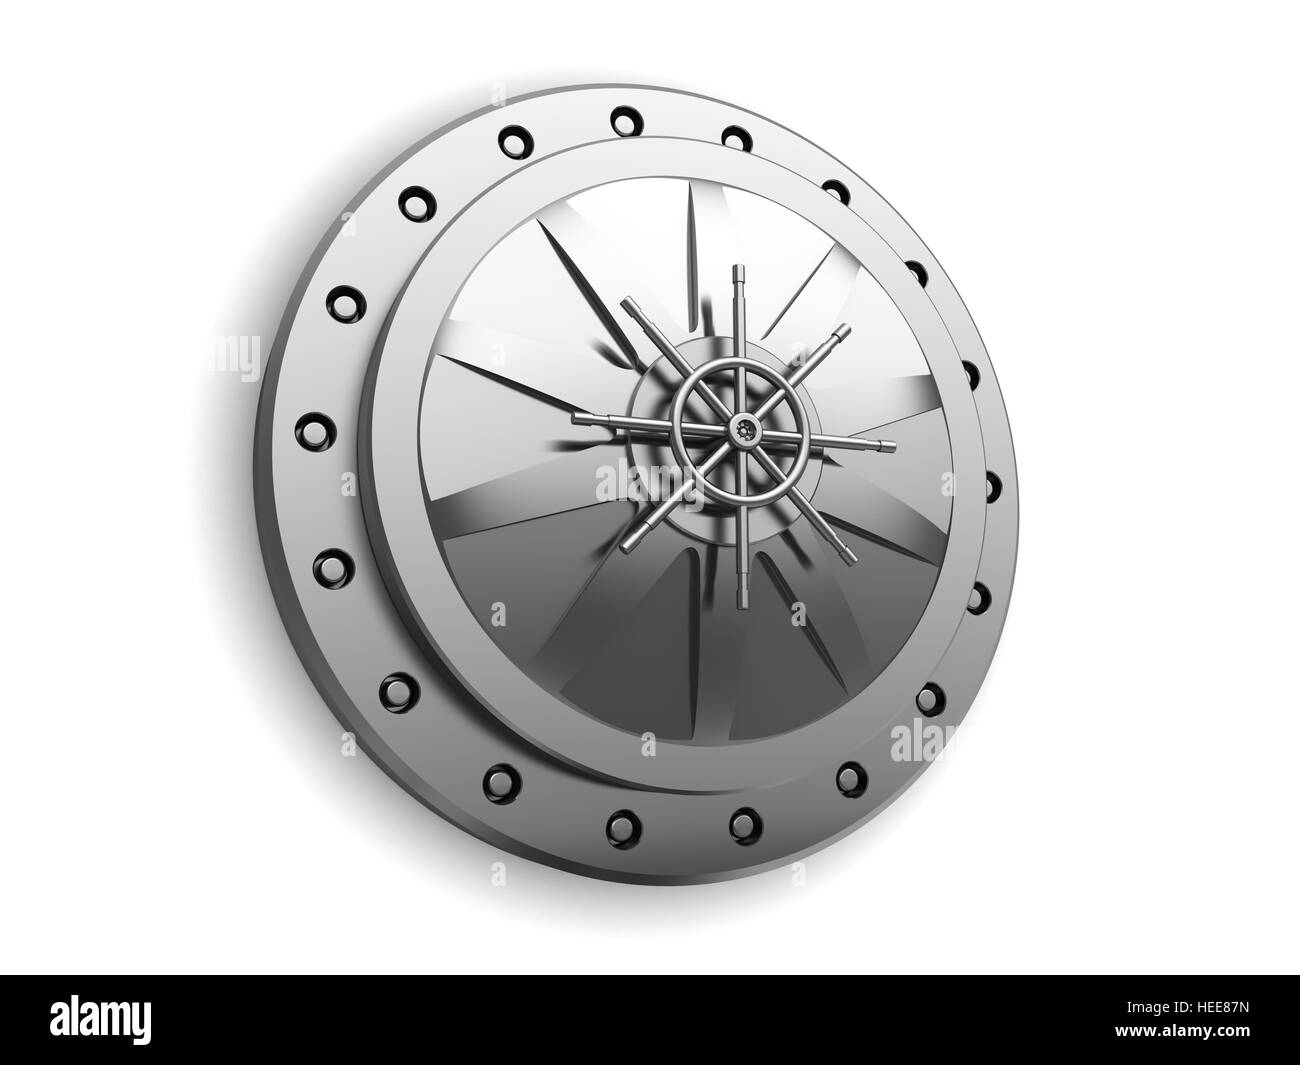 3d illustration of closed vault door over white background Stock Photo